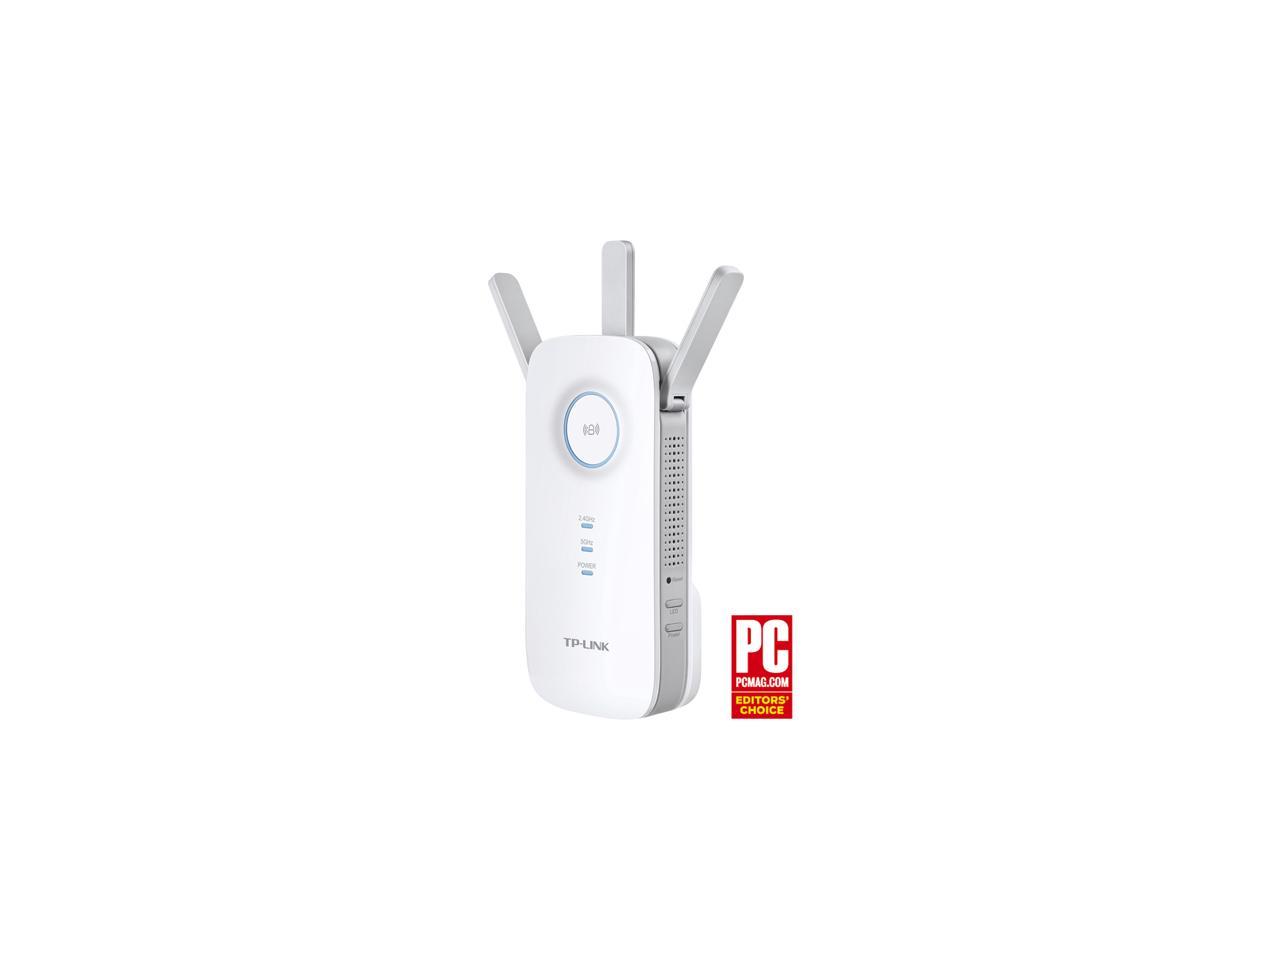 TP-Link AC1750 WiFi Extender (RE450), PCMag Editor's Choice, Up to 1750Mbps, Dual Band WiFi Repeater, Internet Booster, Extend W